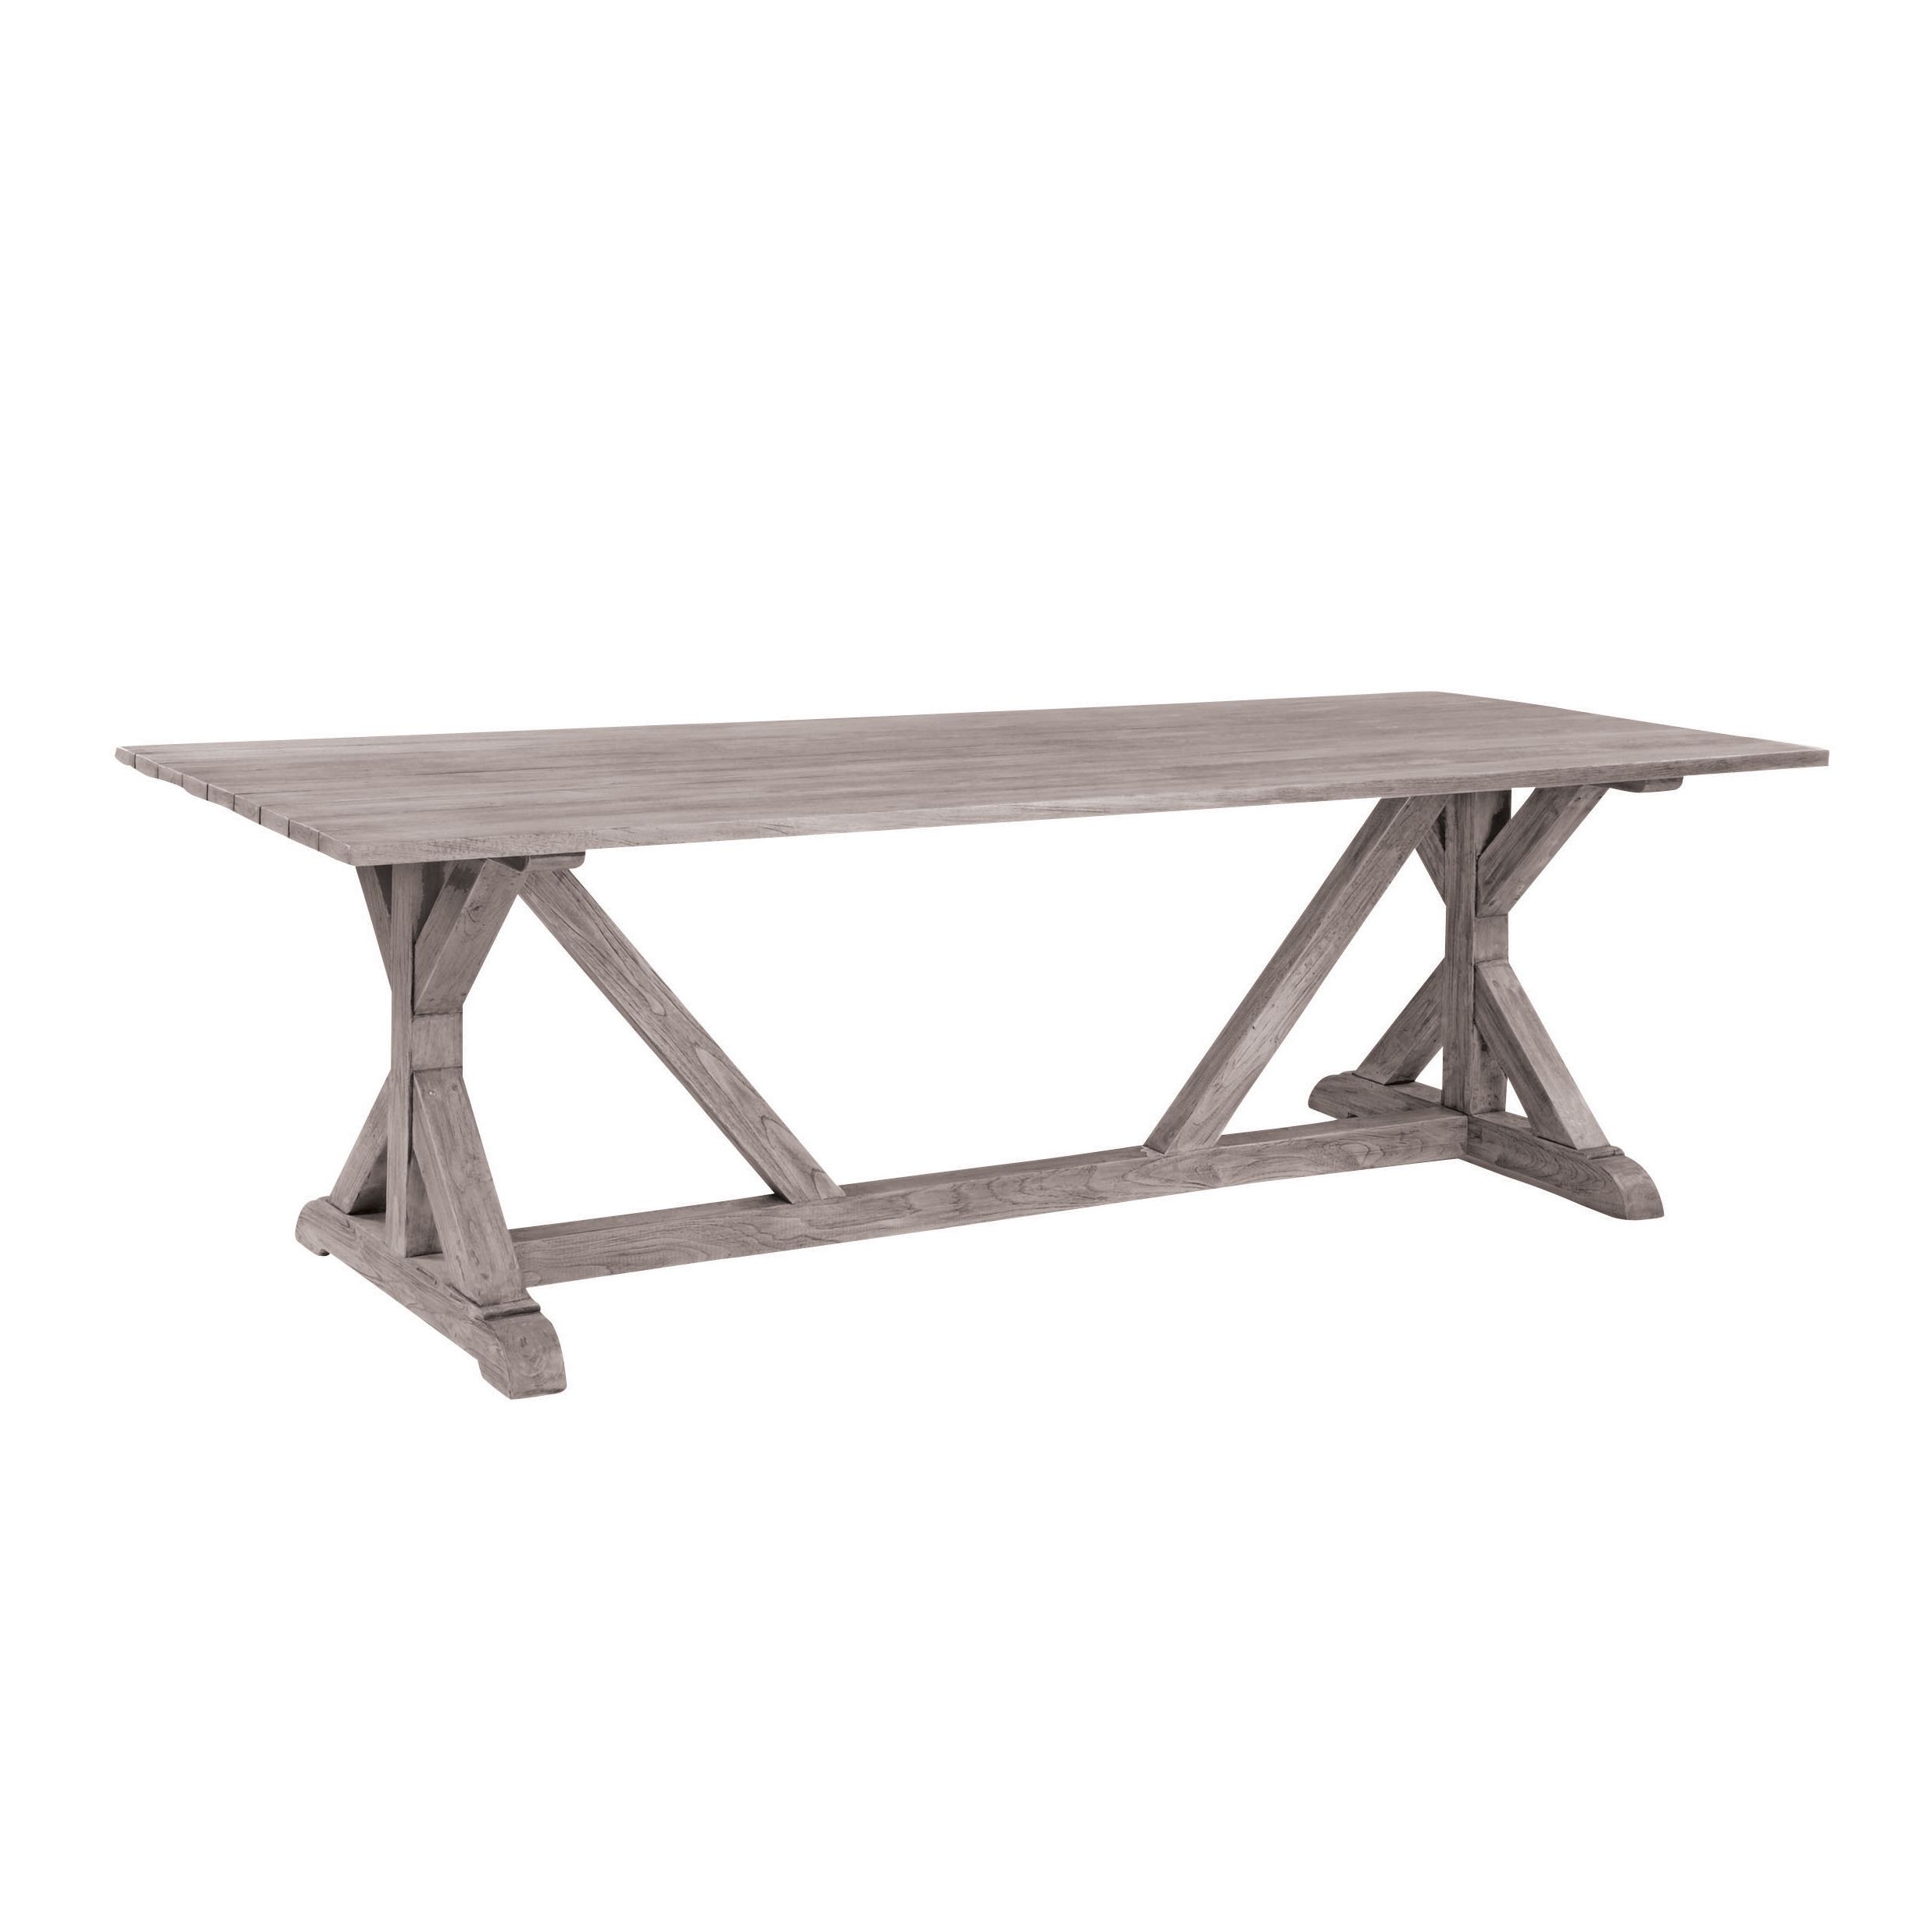 Provence Accent Dining Tables Regarding Recent Provence Rectangular Dining Table – Casual Living (View 8 of 25)